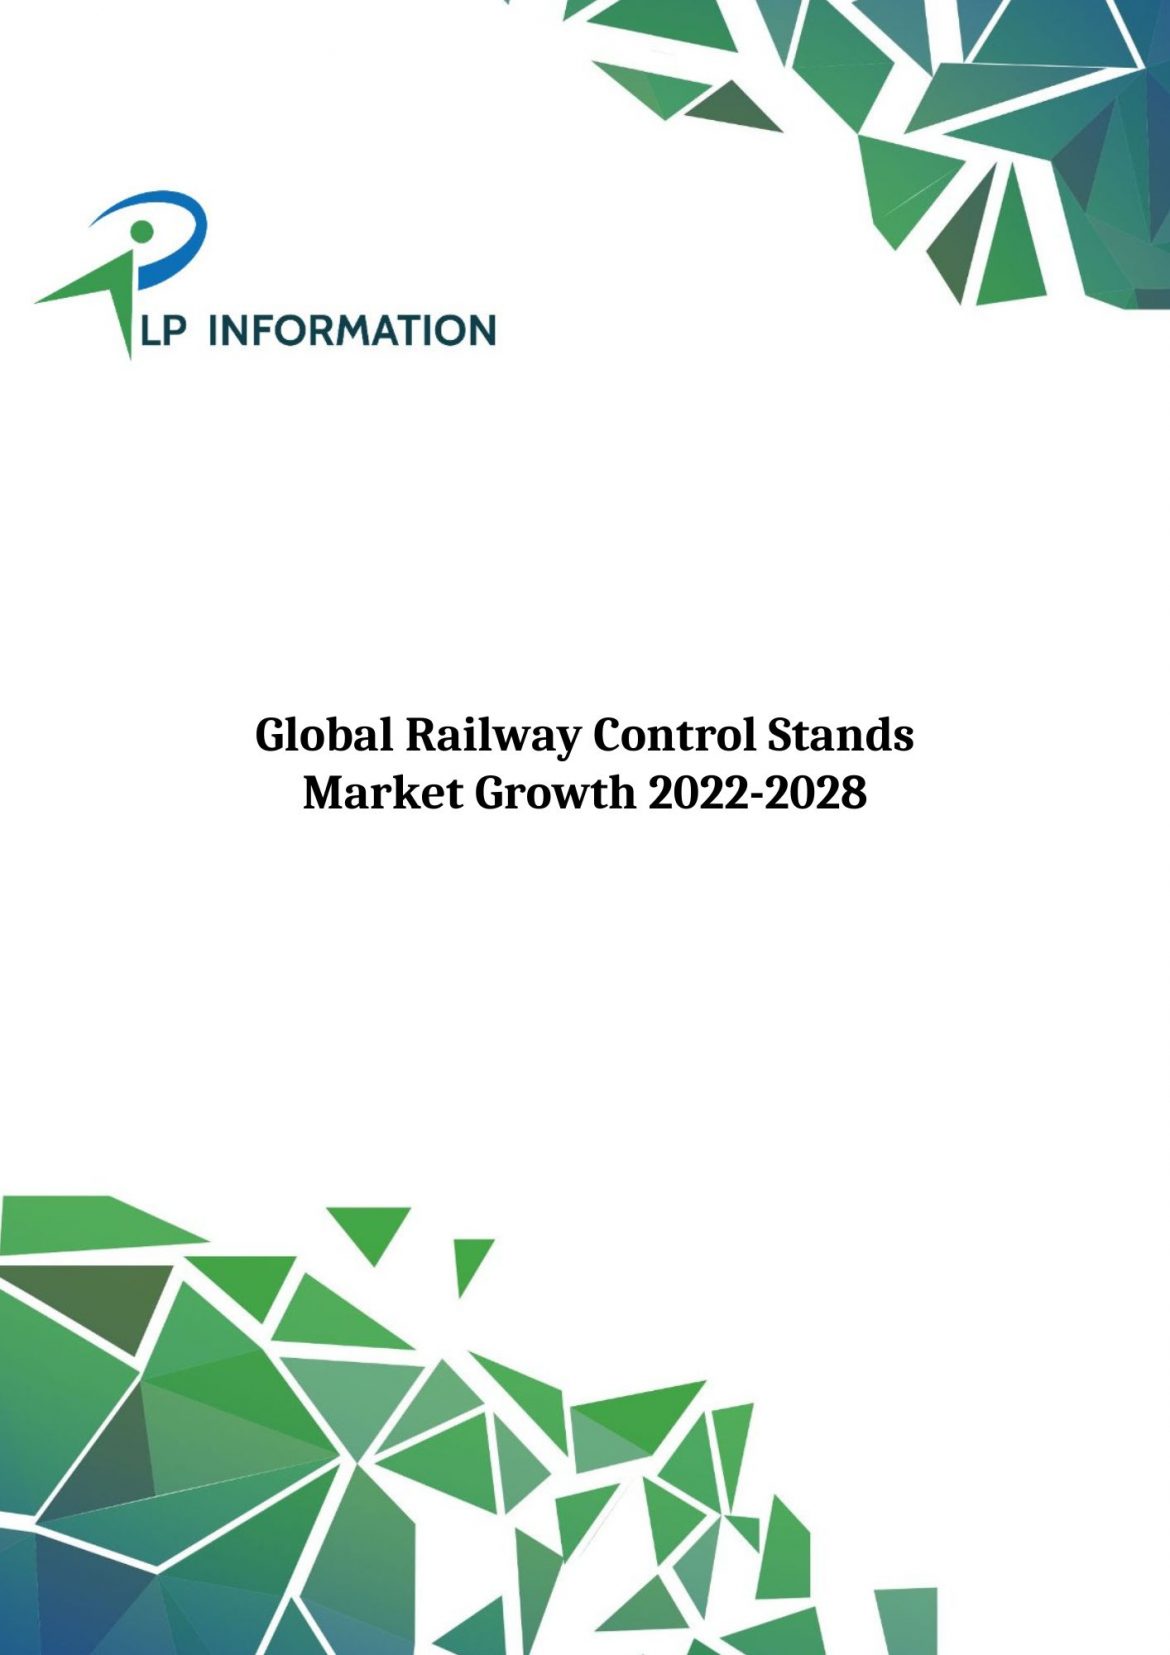 Global Railway Control Stands Market Growth 2022-2028